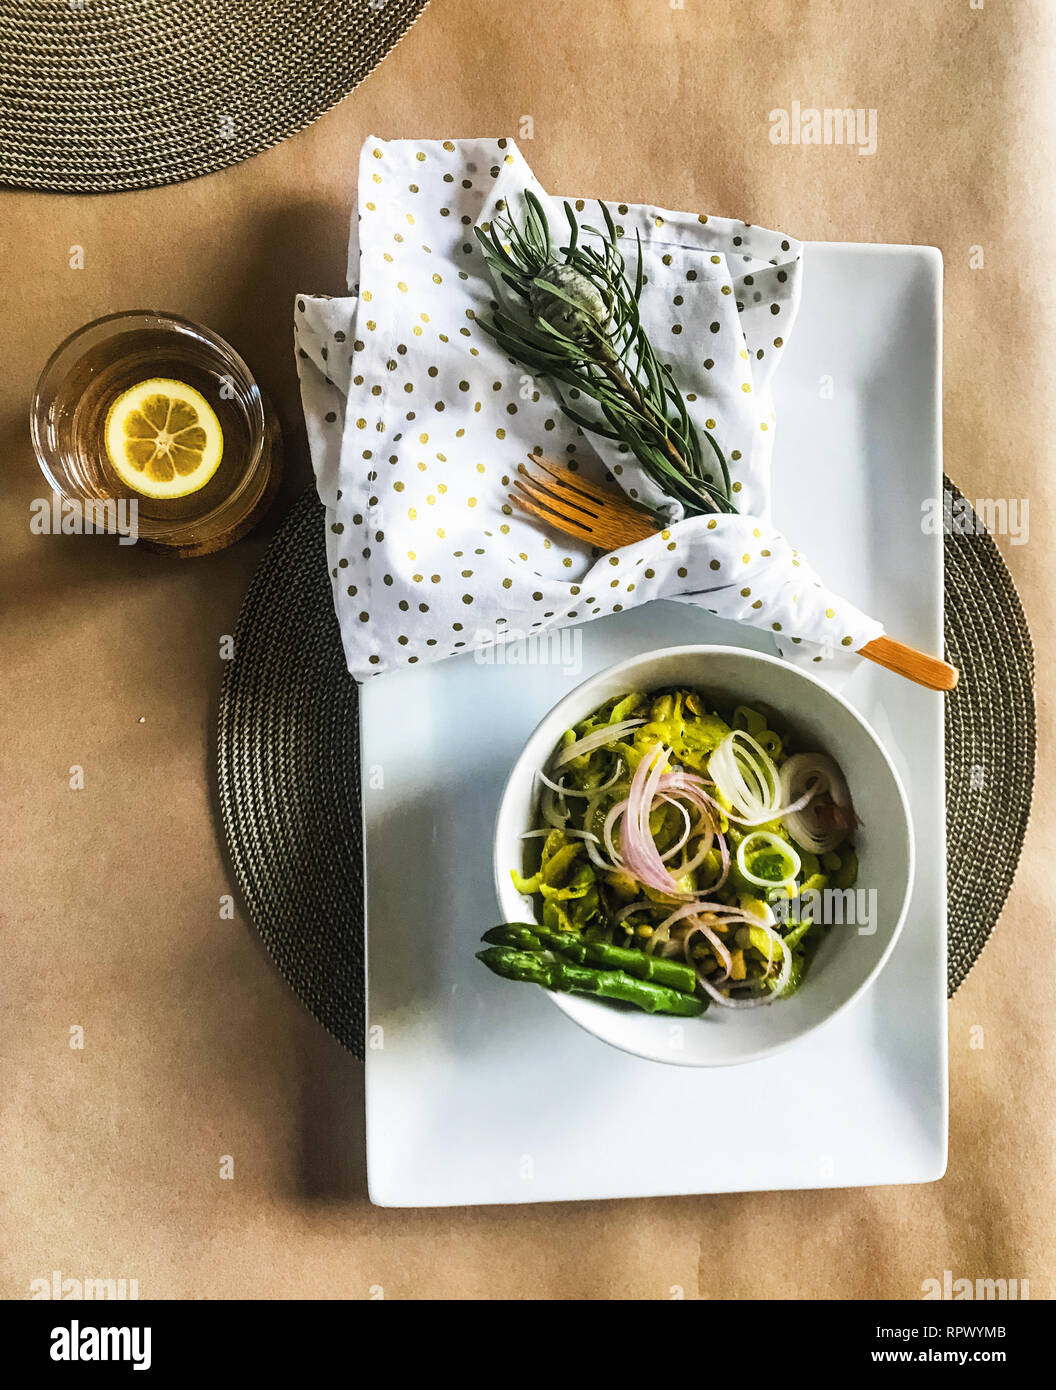 Vegeable salad as breakfast with asparagus and avocado Stock Photo